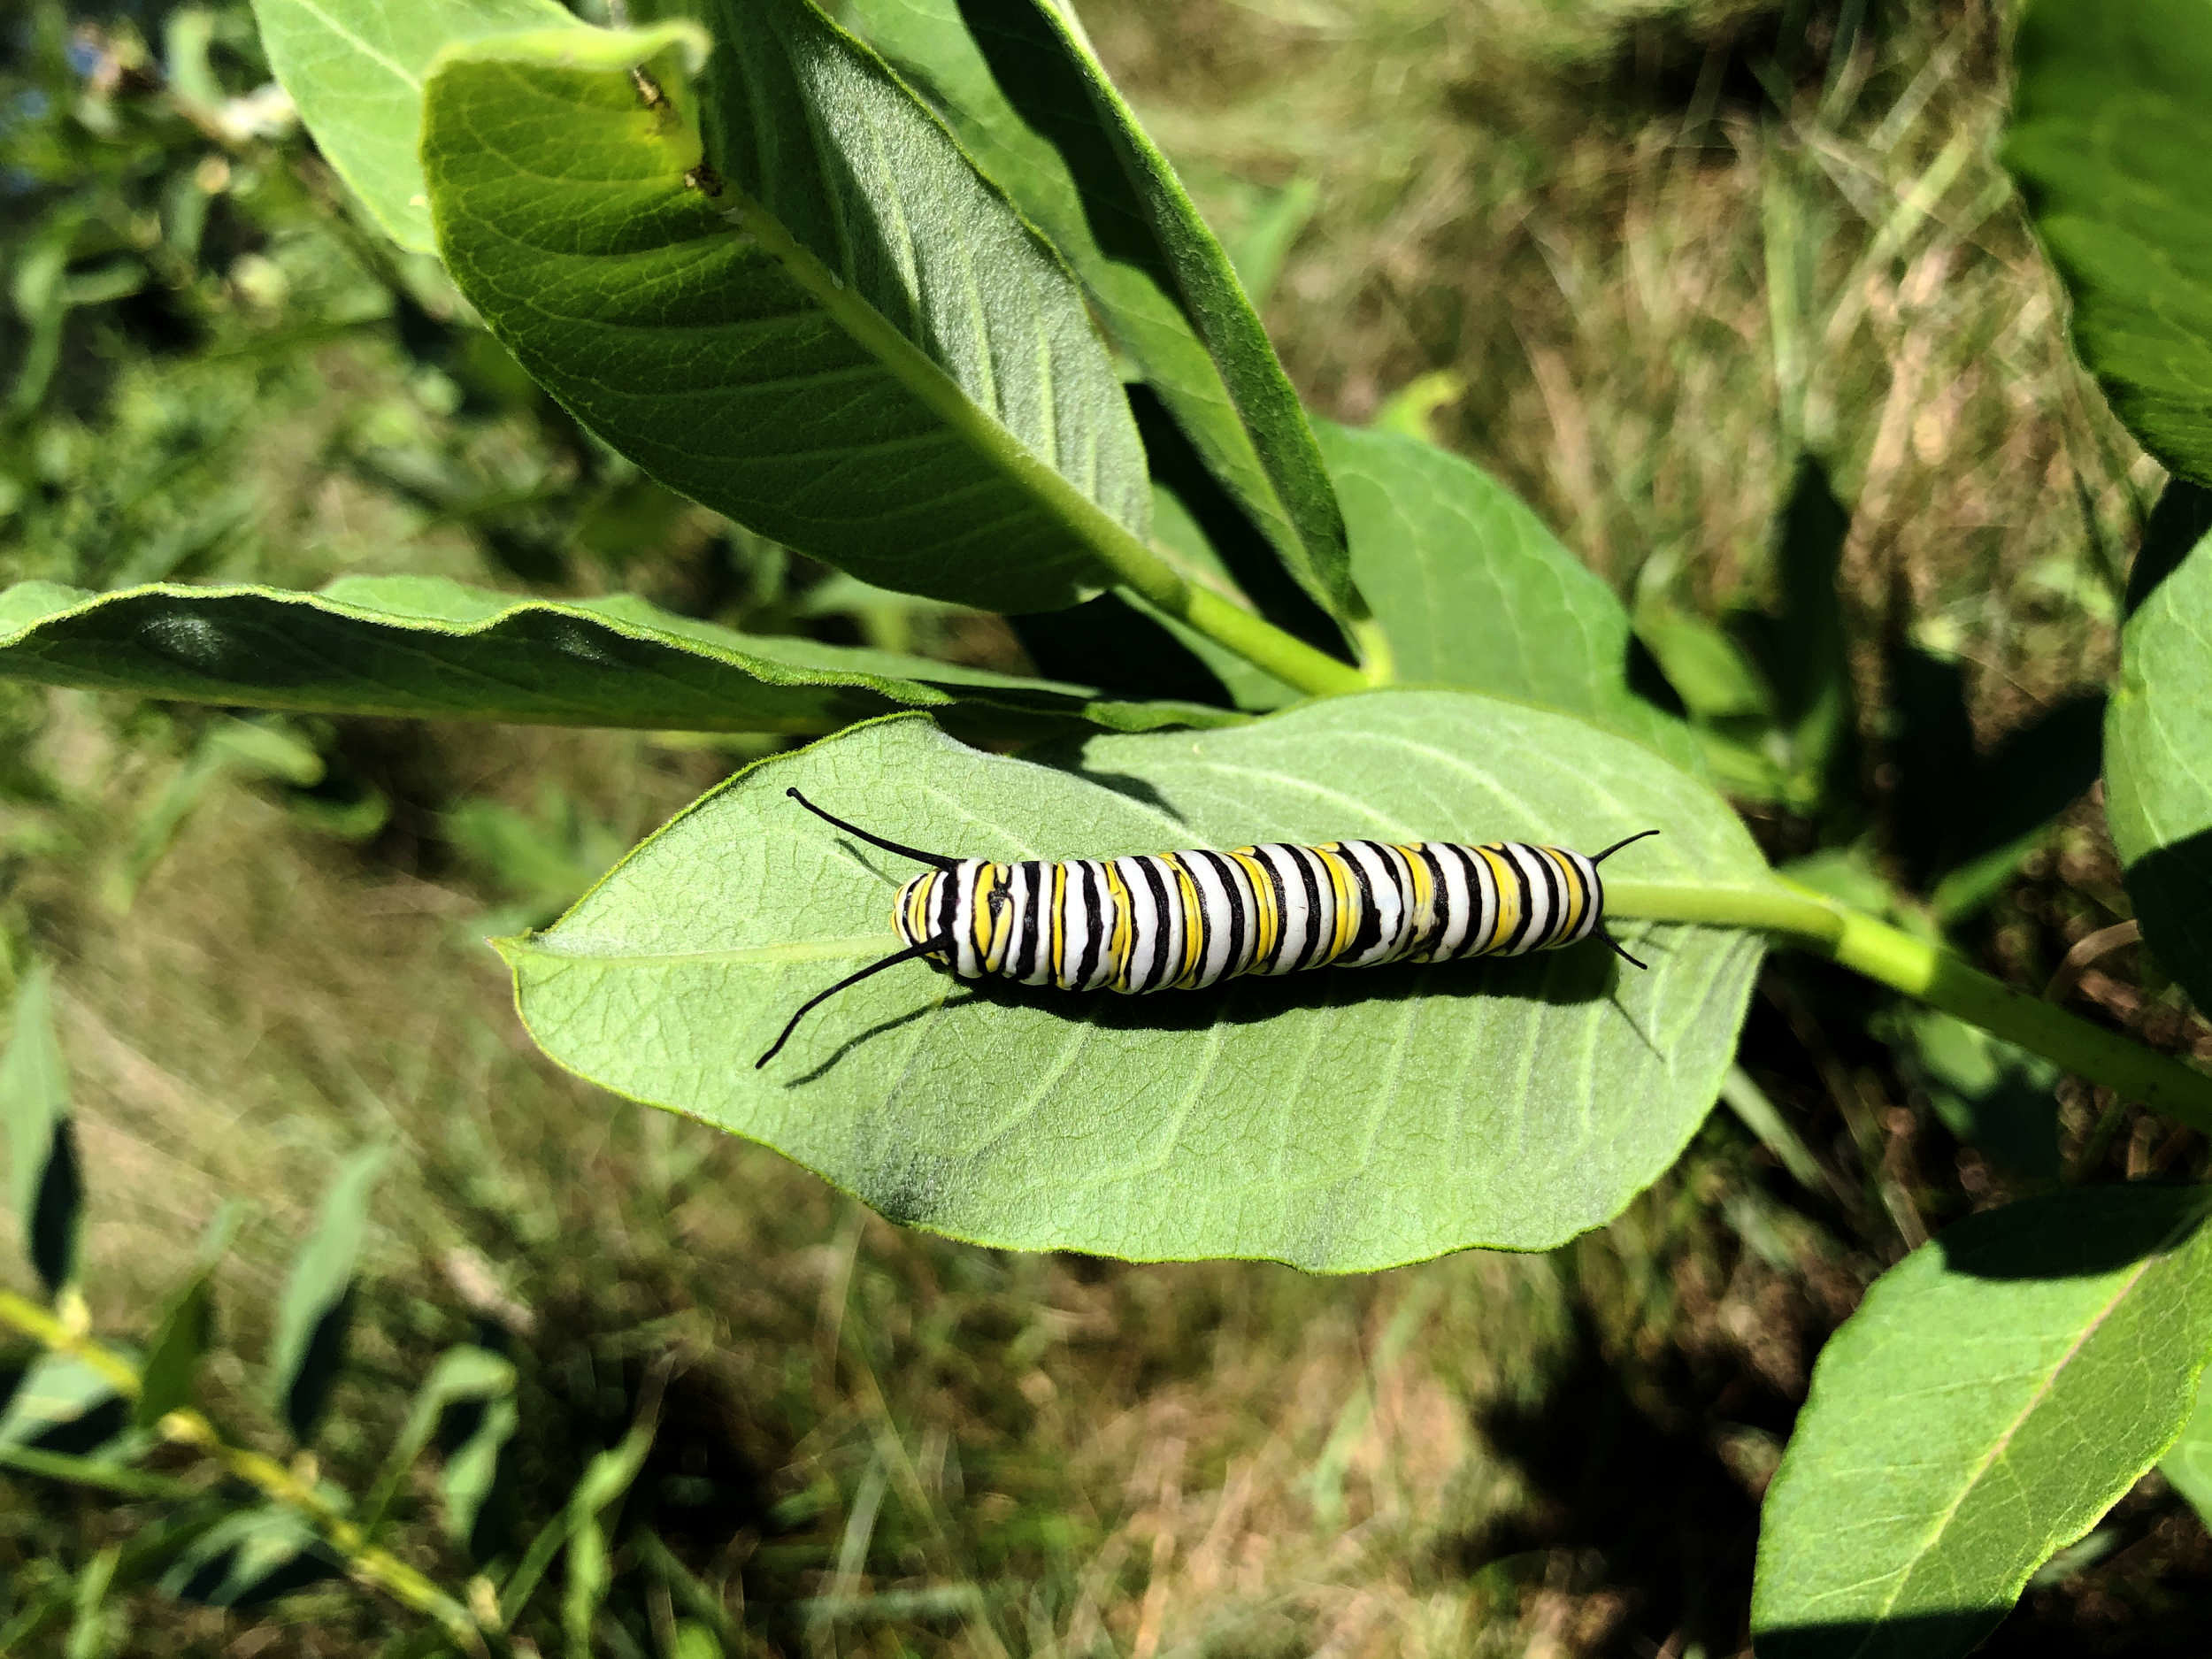 A black-and-yellow monarch caterpillar on a green milkweed leaf. (photo © Brett Amy Thelen)